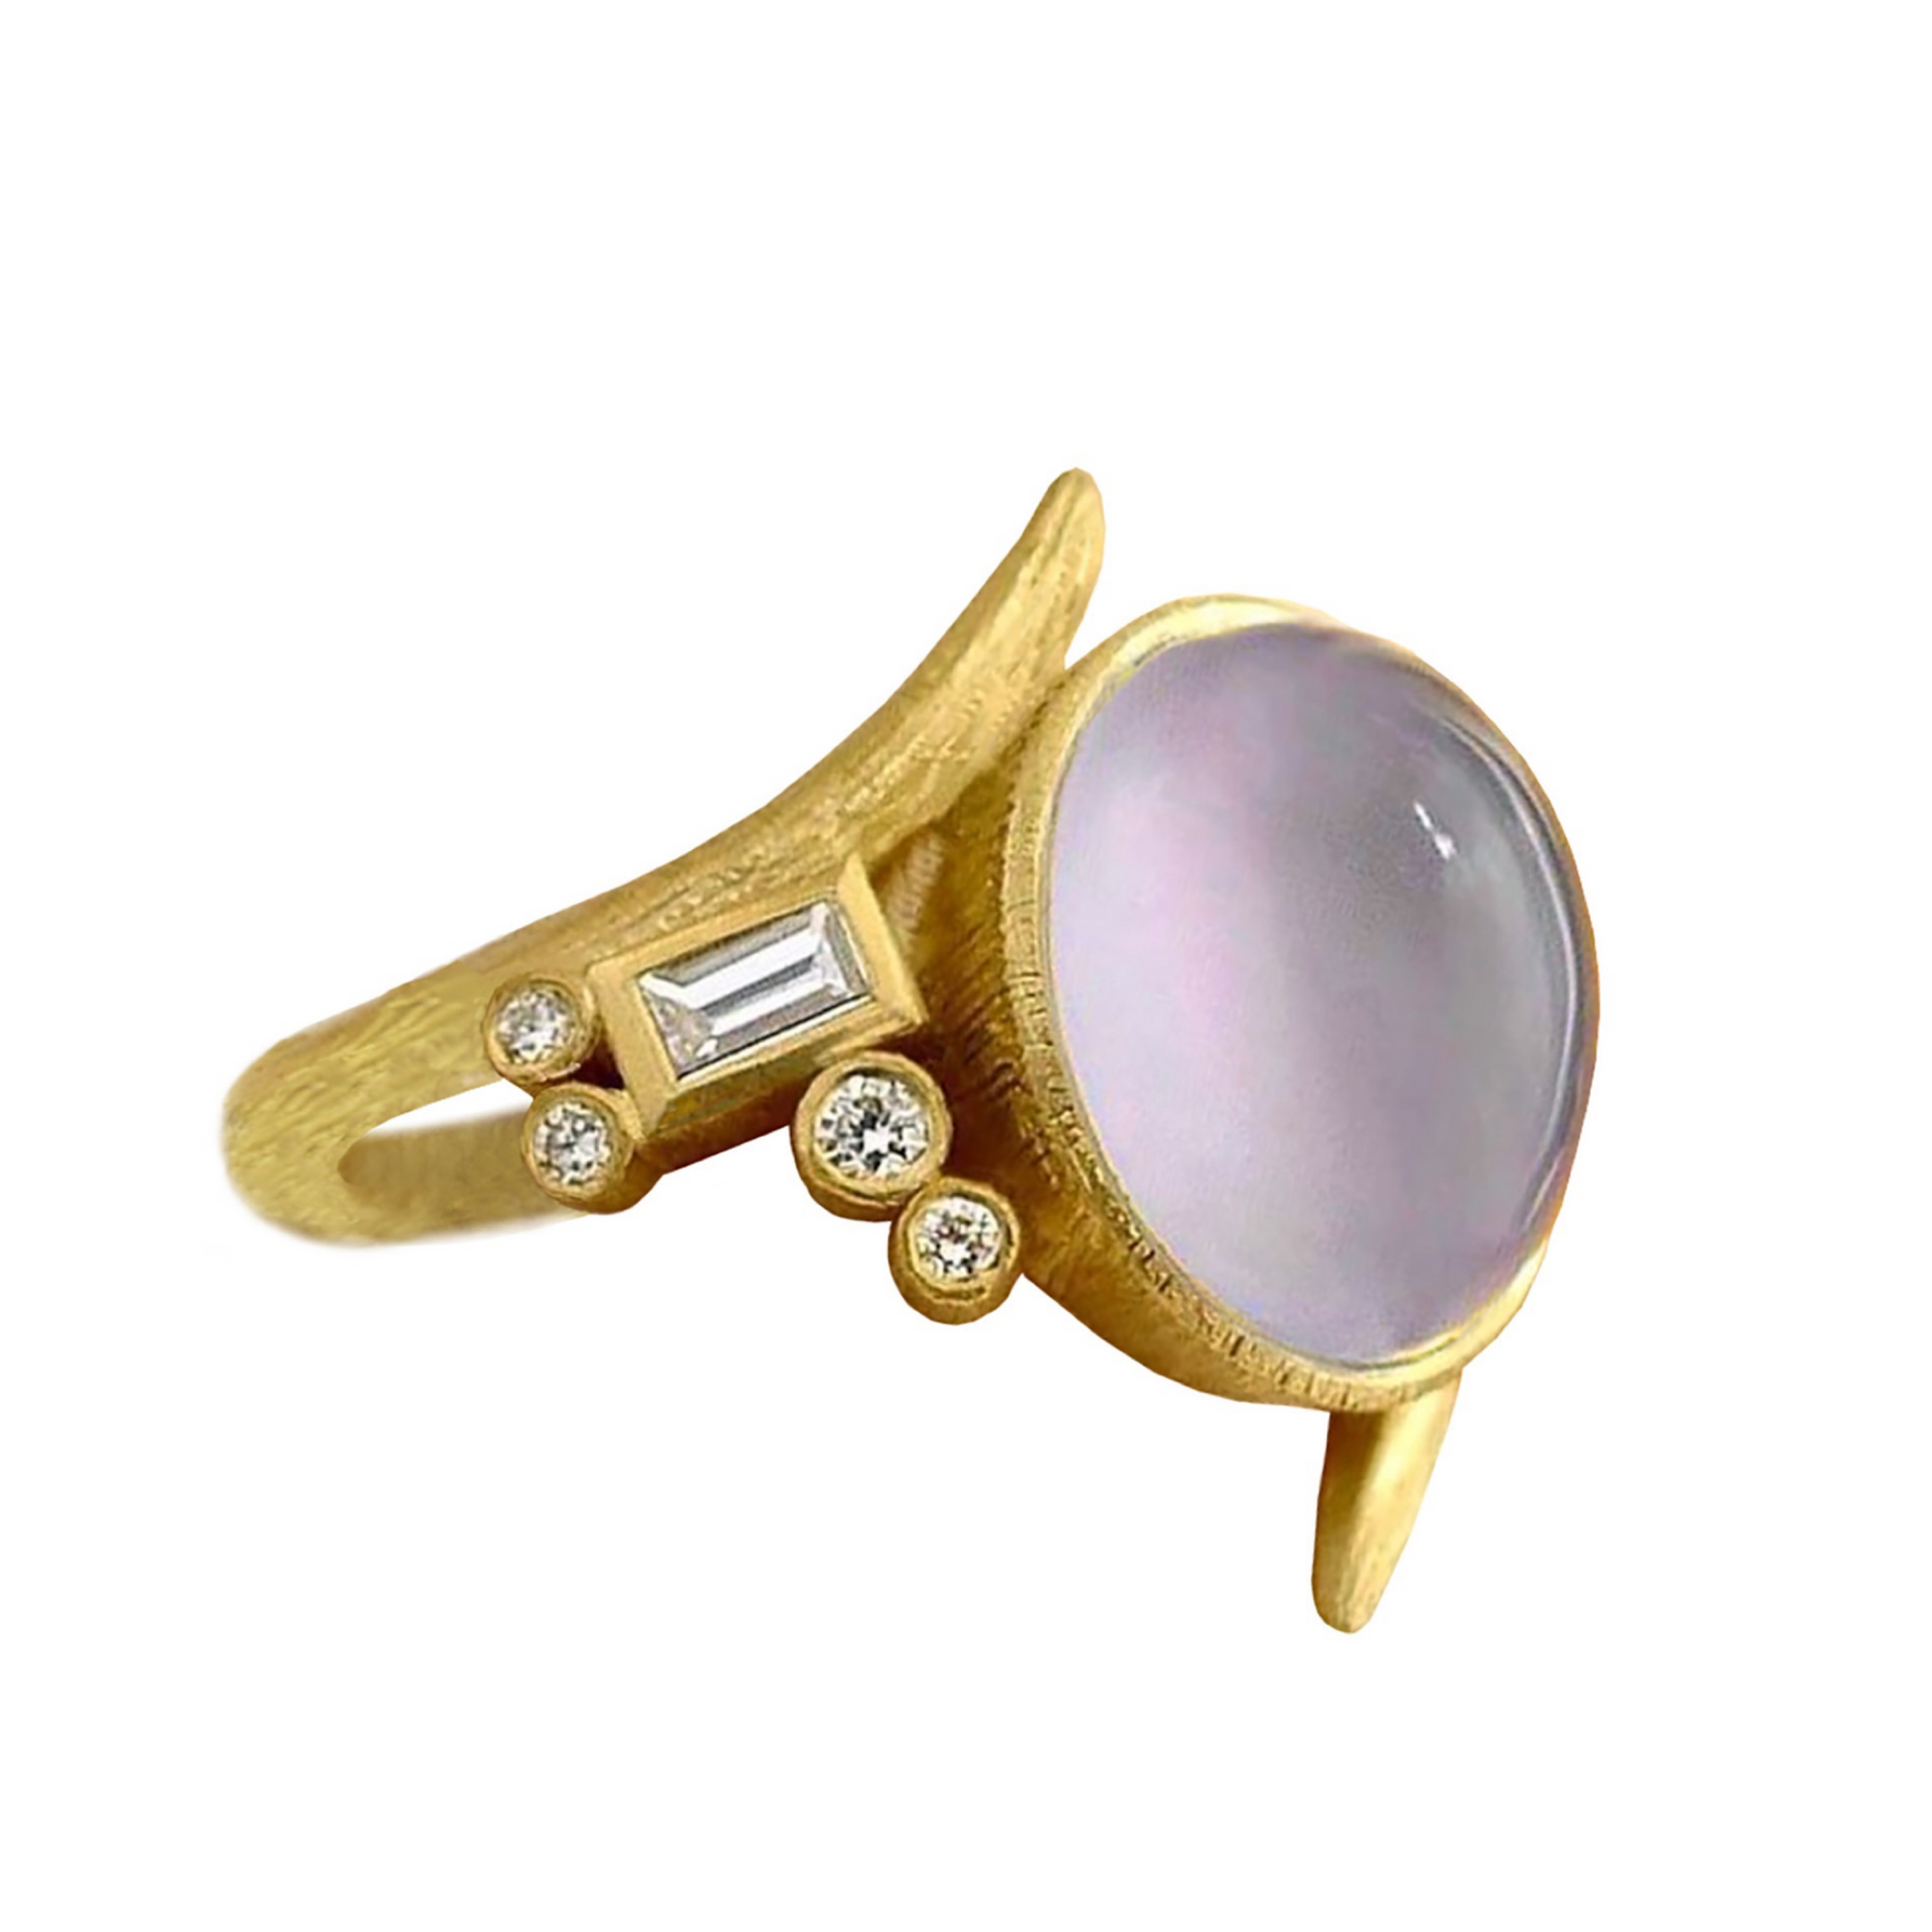 Lavender Chalcedony Vine Ring by Laurie Kaiser available at Talisman Collection Fine Jewelers in El Dorado Hills, CA and online. Made from 18k yellow gold, it features a luminescent lavender chalcedony stone that's accented with 0.18 carats of white brilliant-cut and baguette diamonds, giving it an extra sparkle. The unique vine design adds an air of sophistication to the ring making it a piece you'll treasure forever. 